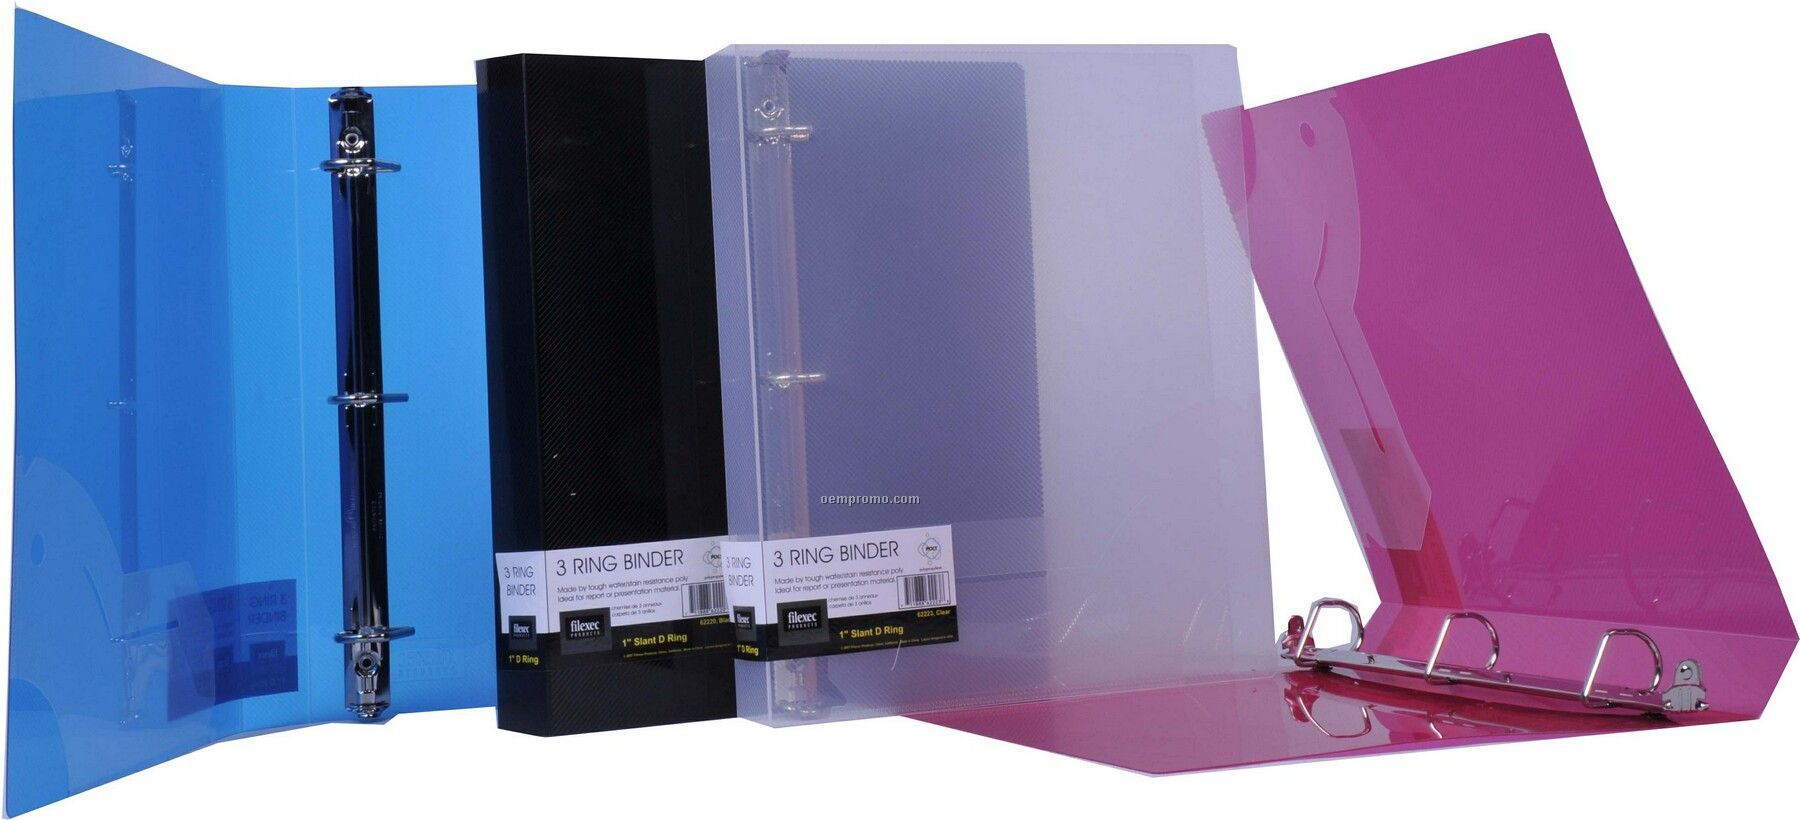 Translucent Black D-ring Binder With 1 1/2" Ring